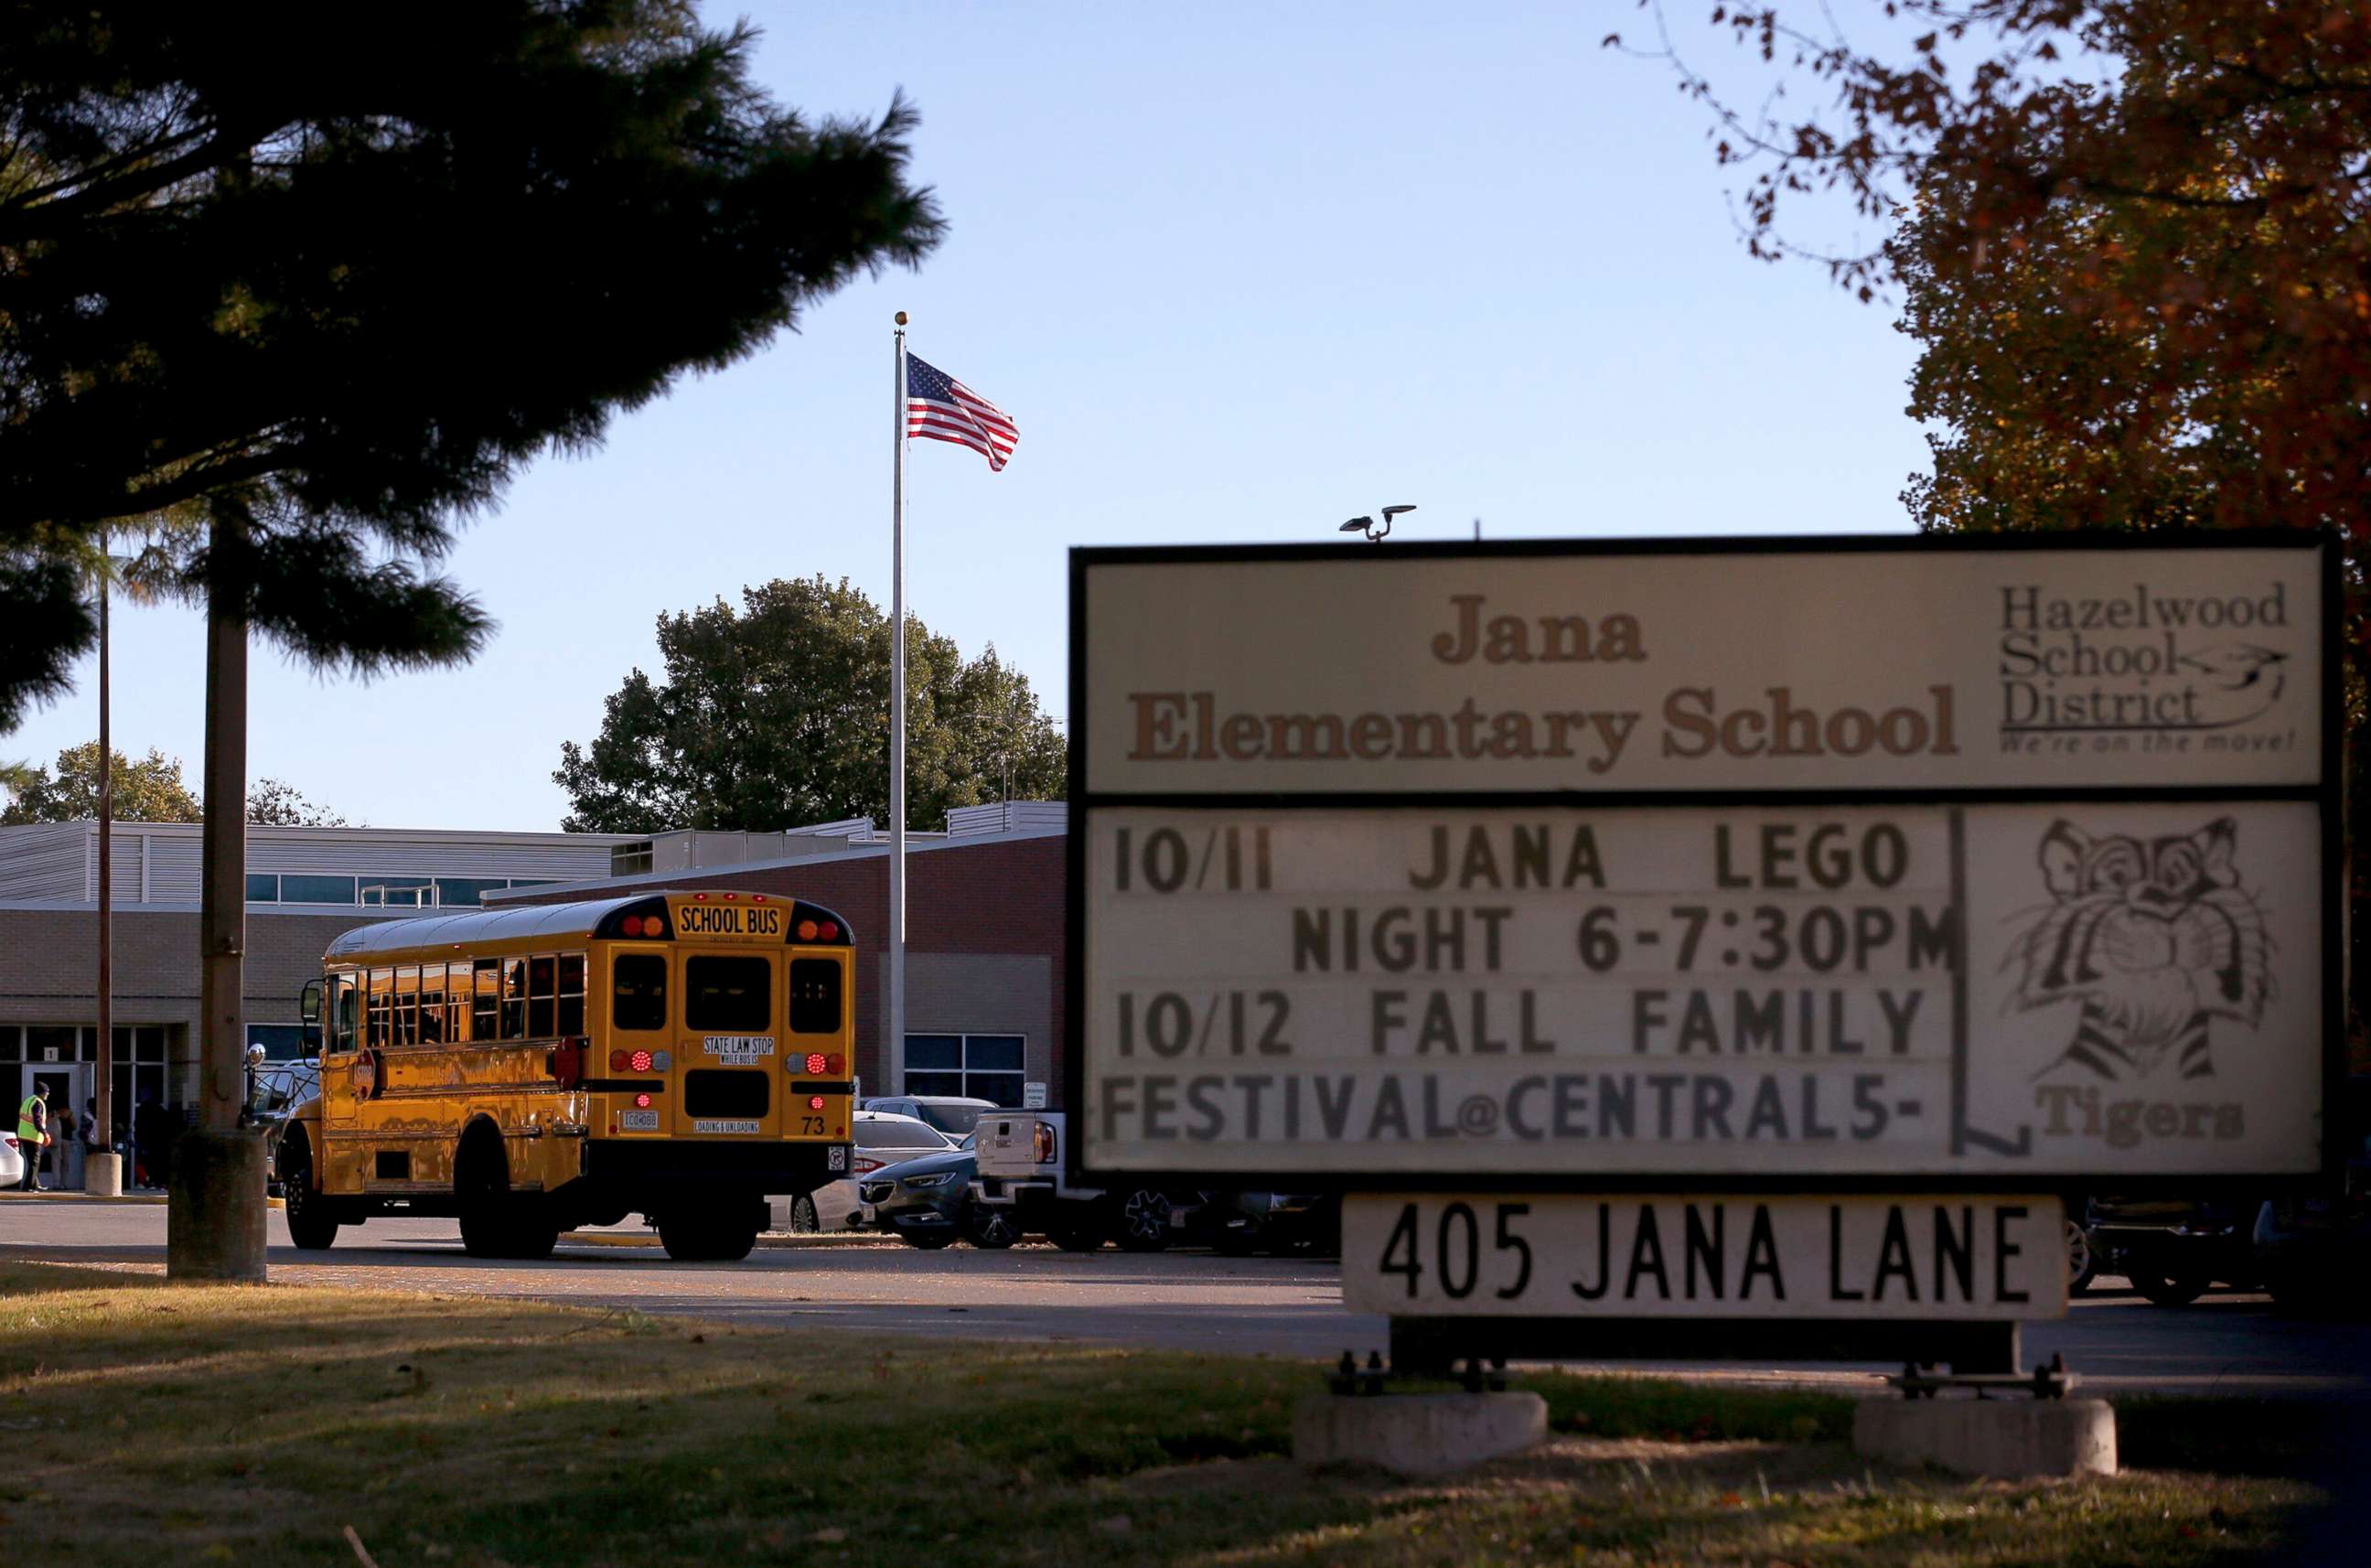 PHOTO: A school bus arrives at Jana Elementary School on Oct. 17, 2022 in Florissant, Mo. Radioactive samples were found at the Hazelwood School District school, according to a recently released report.